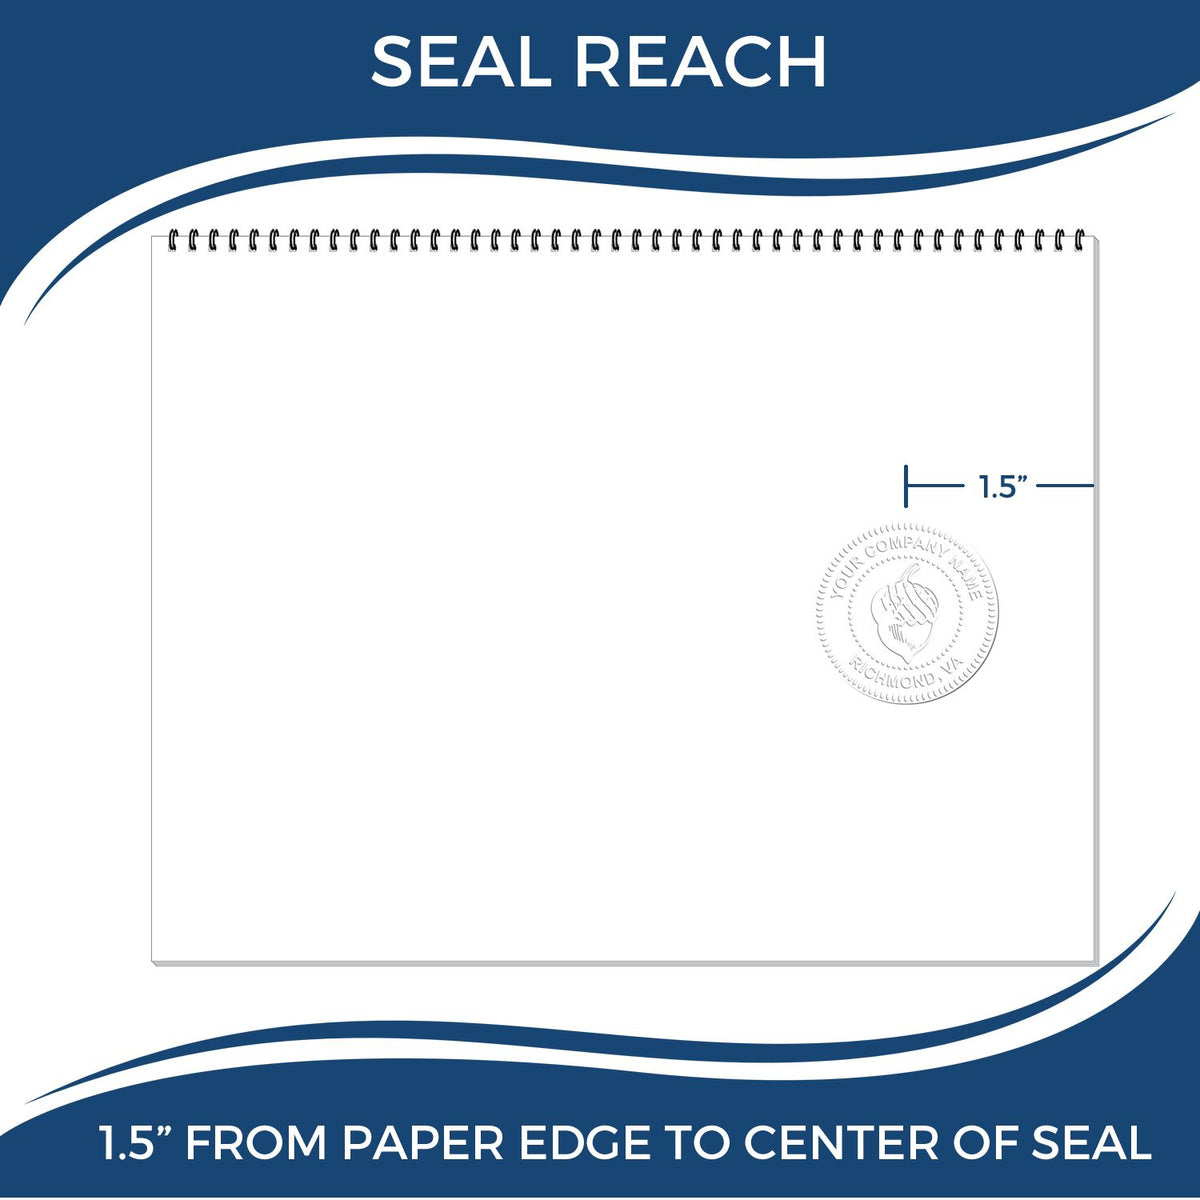 An infographic showing the seal reach which is represented by a ruler and a miniature seal image of the Handheld Ohio Professional Engineer Embosser